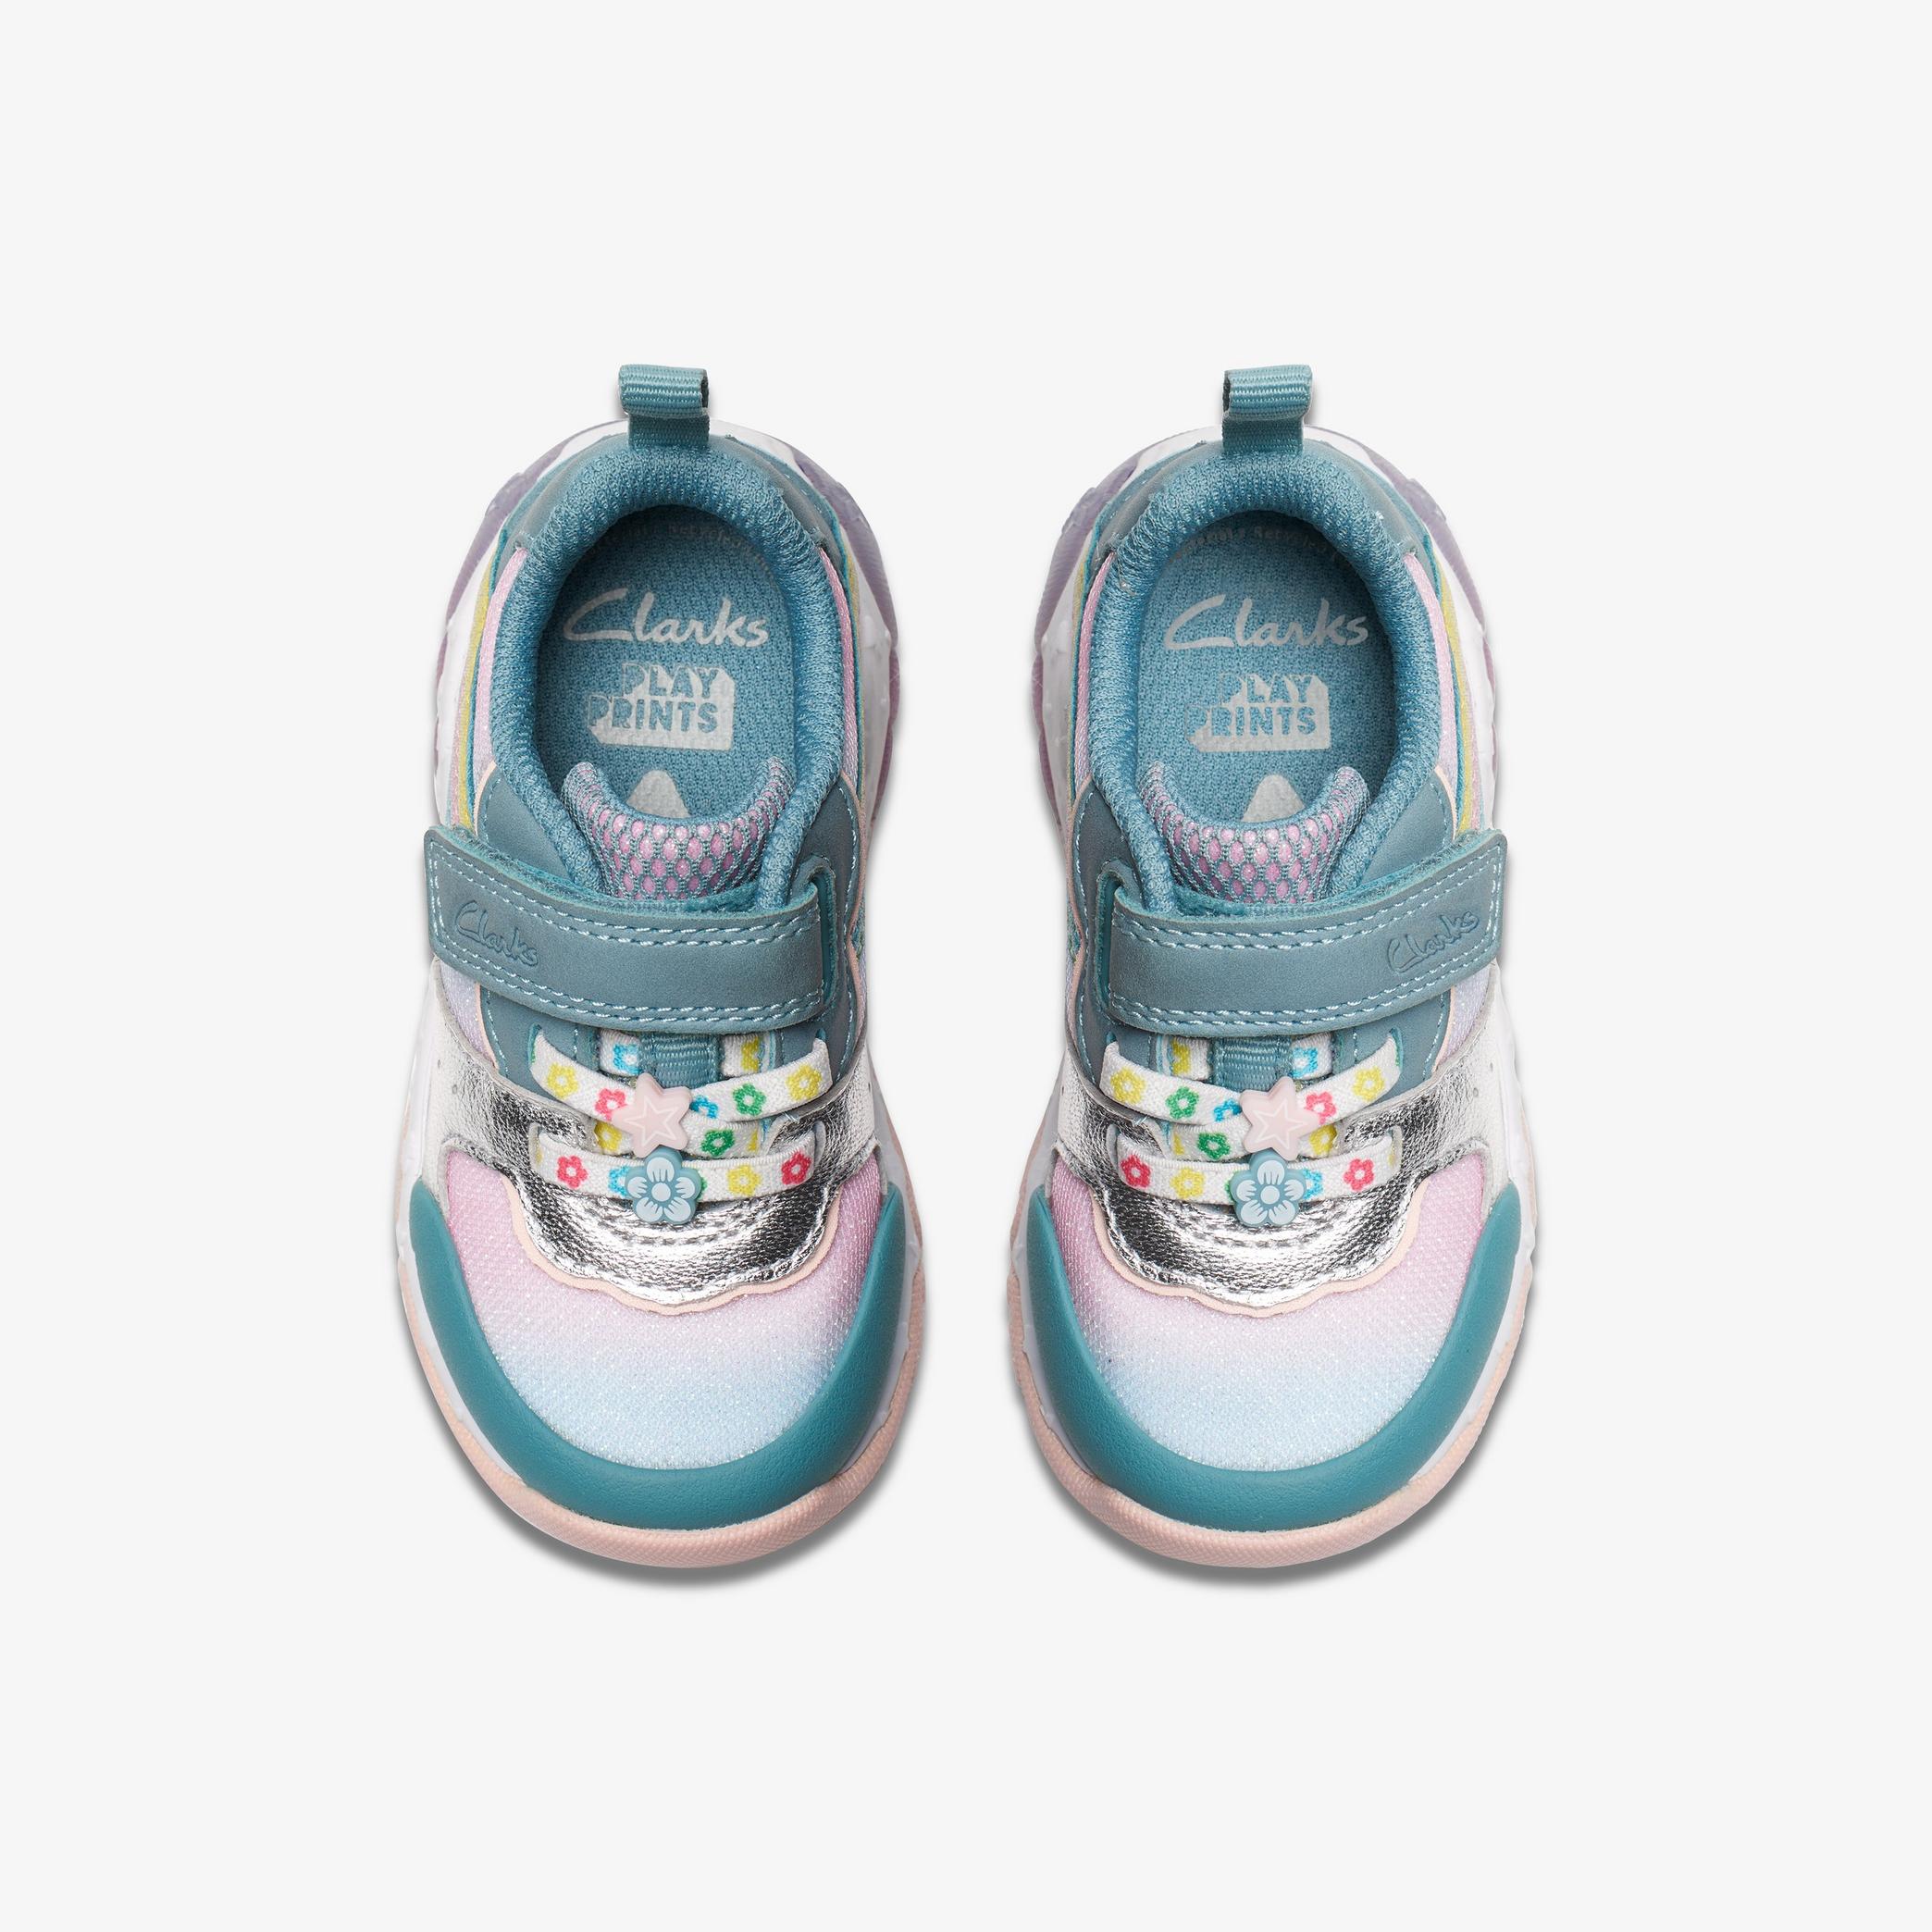 Tidal Star Toddler Aqua Combination Trainers, view 6 of 7